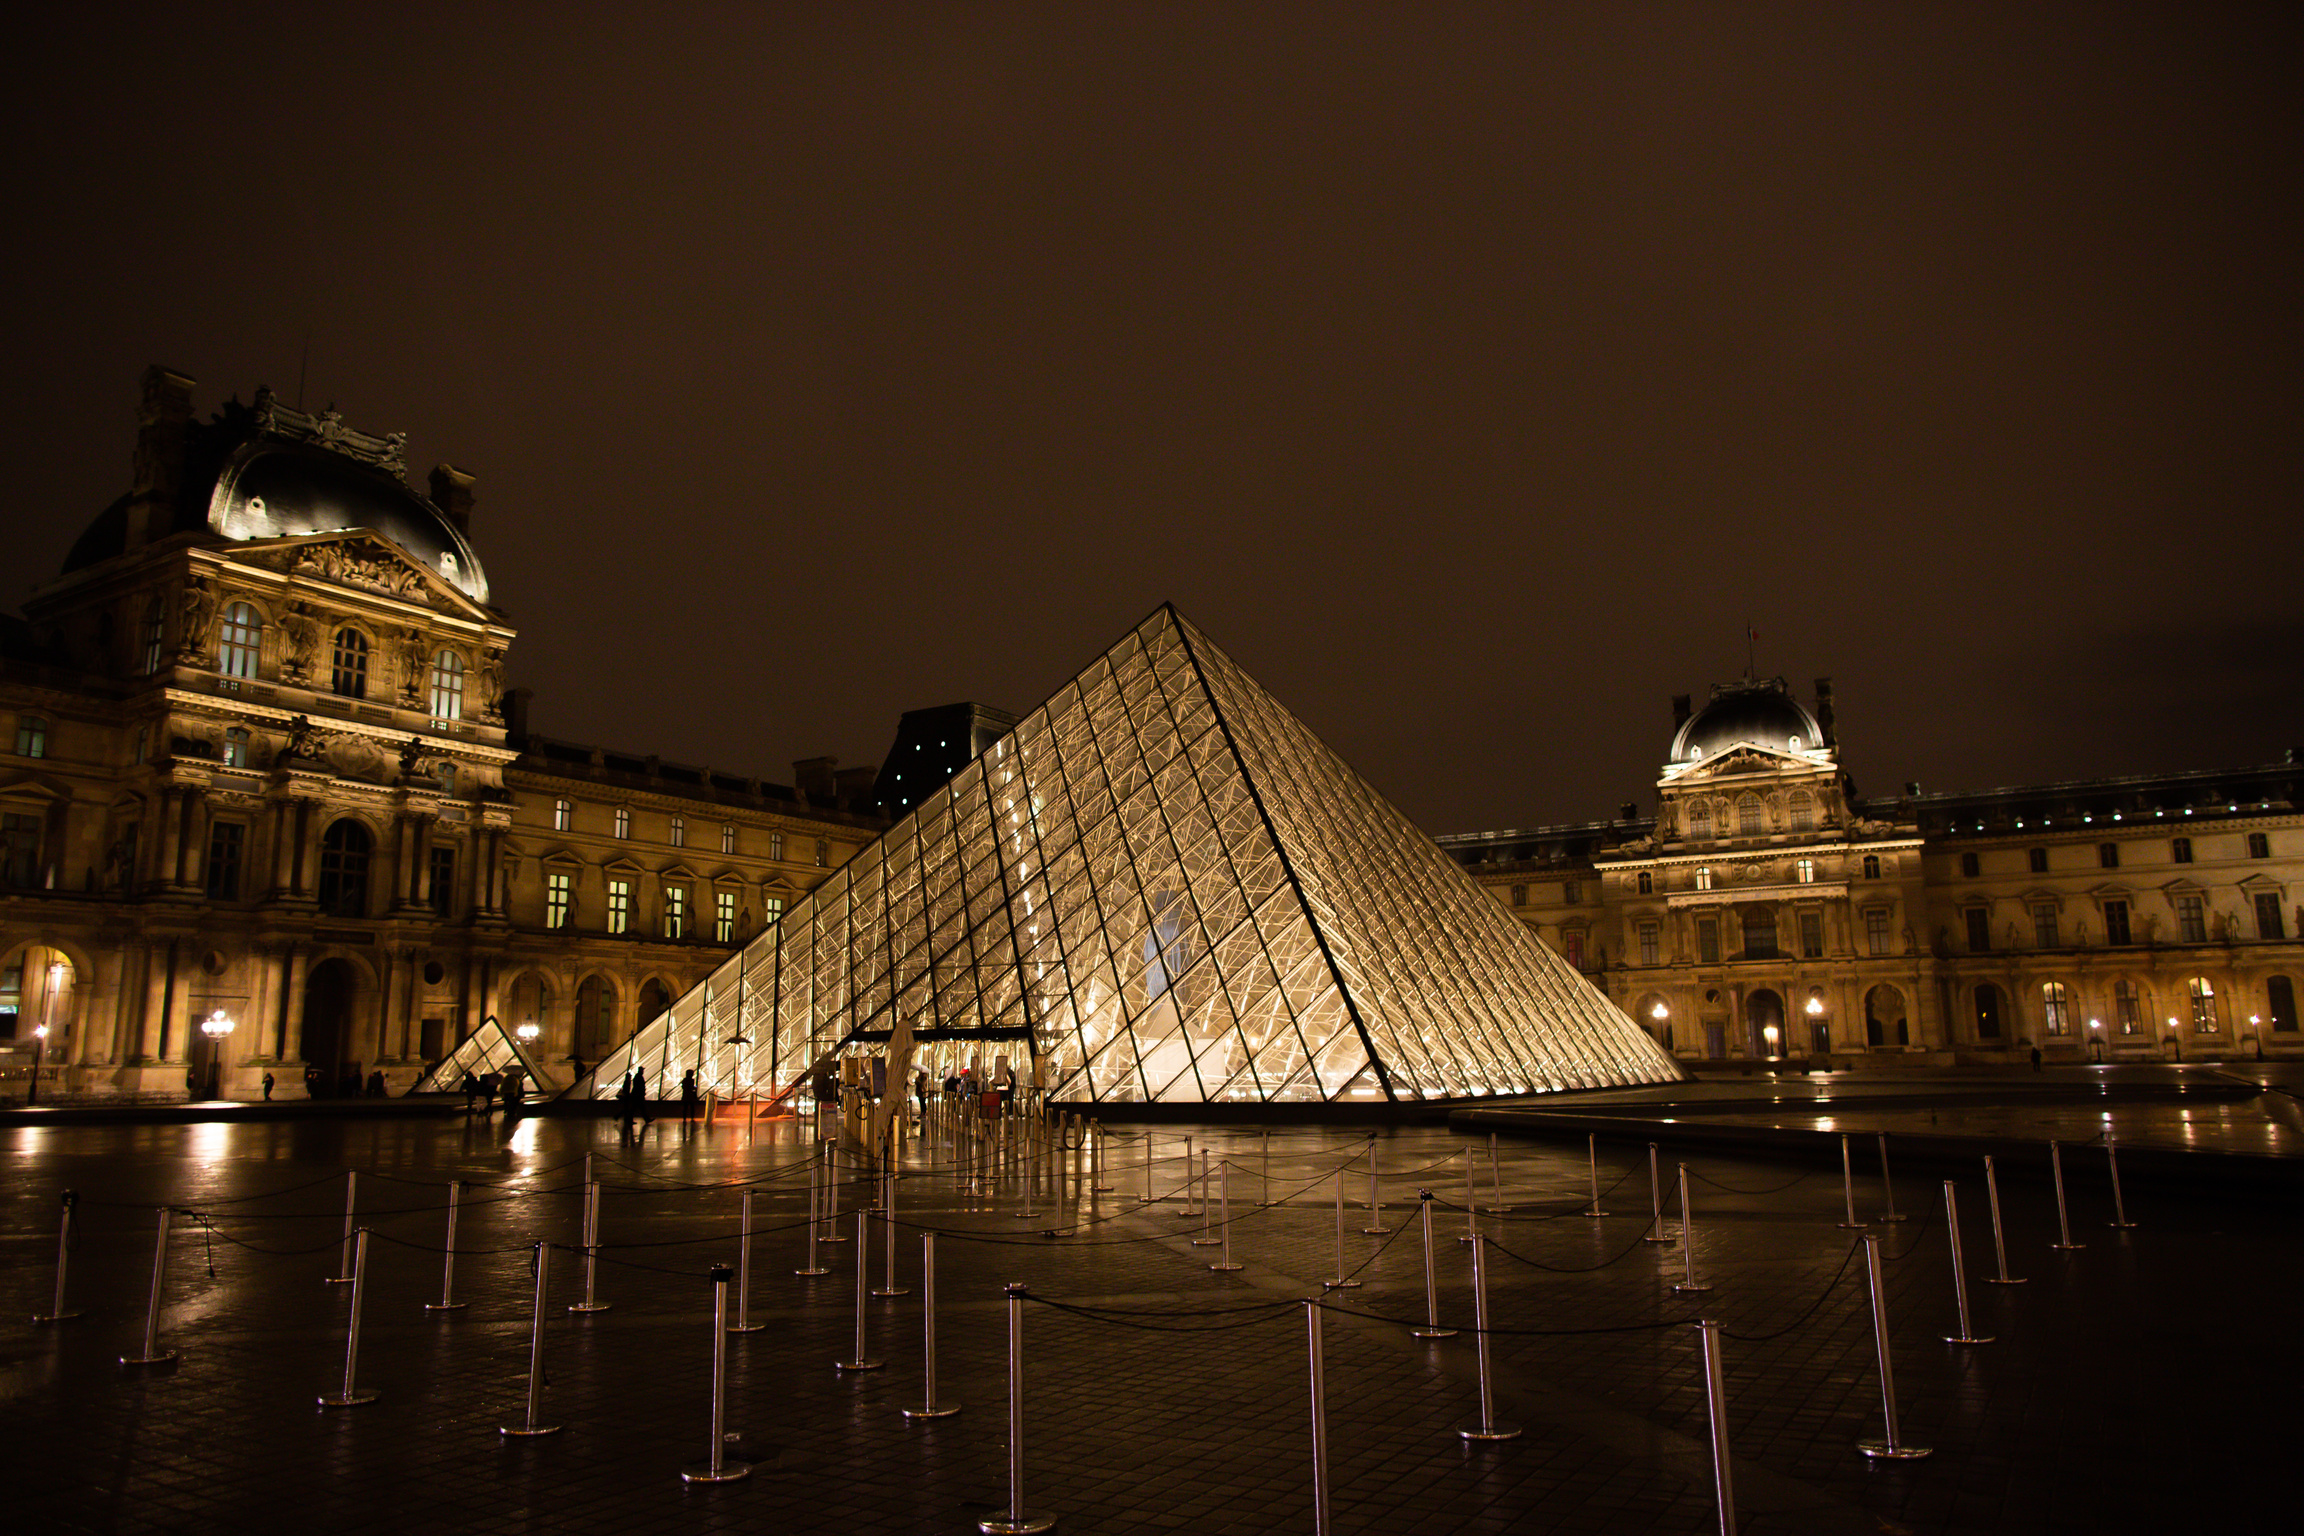 Large Glass Pyramid of Louvre Museum at Night